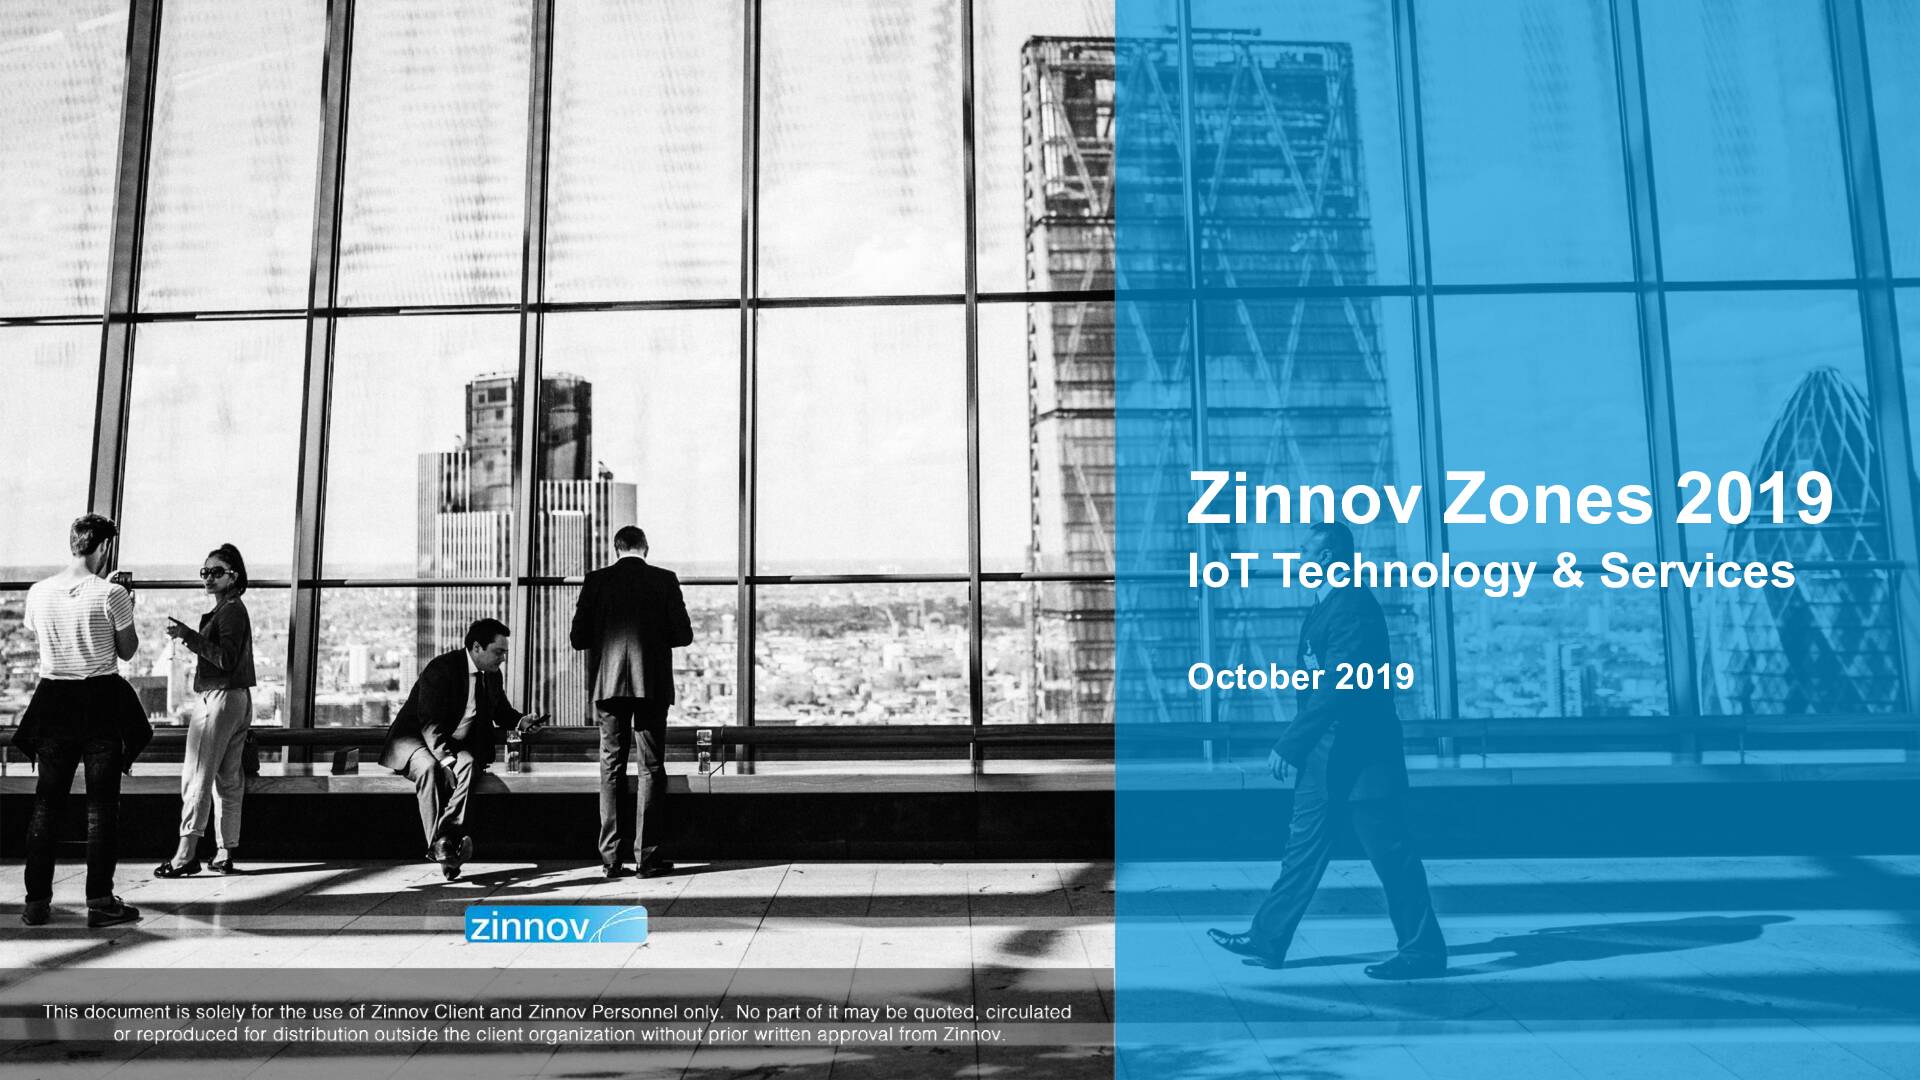 Zinnov Zones Iot Technology Services 2019 Ratings1